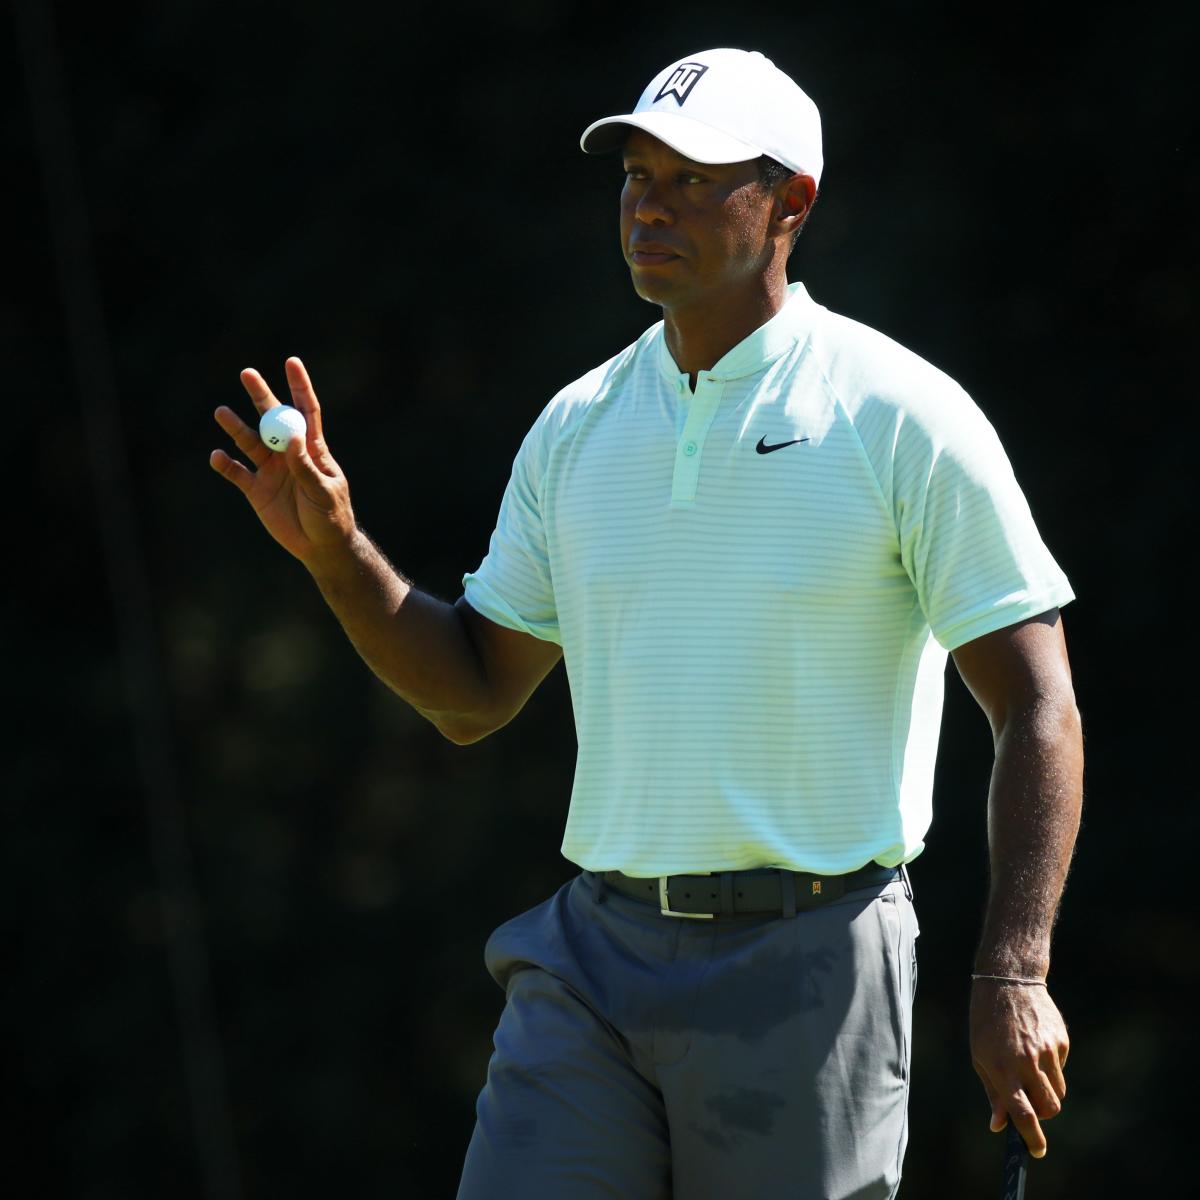 Tiger Woods Tied For Bmw Championship Lead After Shooting 62 In Round 1 Bleacher Report Latest News Videos And Highlights